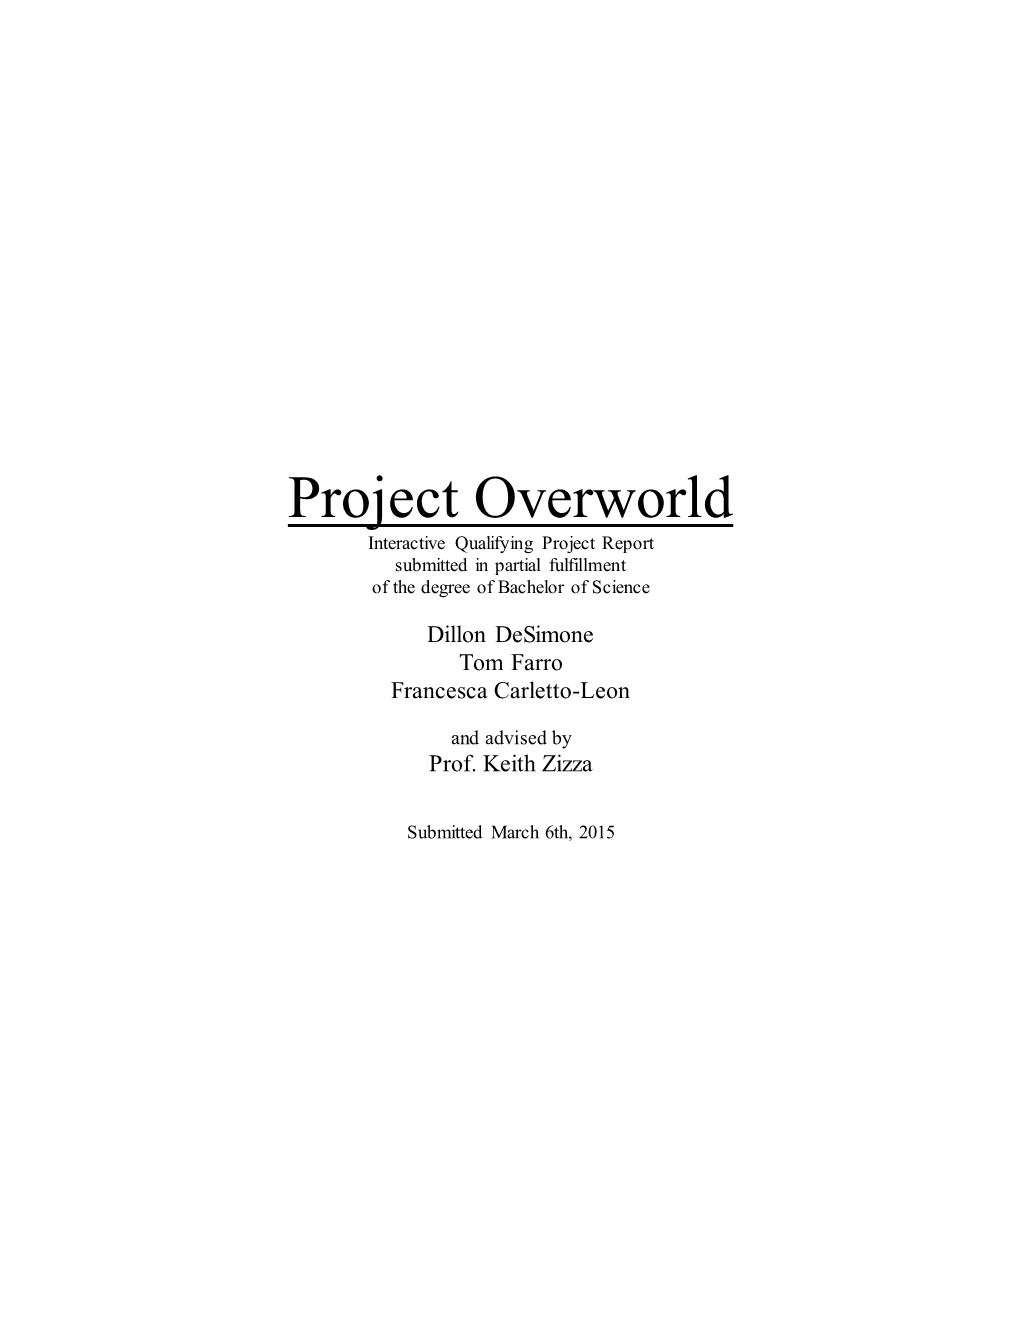 Project Overworld Interactive Qualifying Project Report Submitted in Partial Fulfillment of the Degree of Bachelor of Science